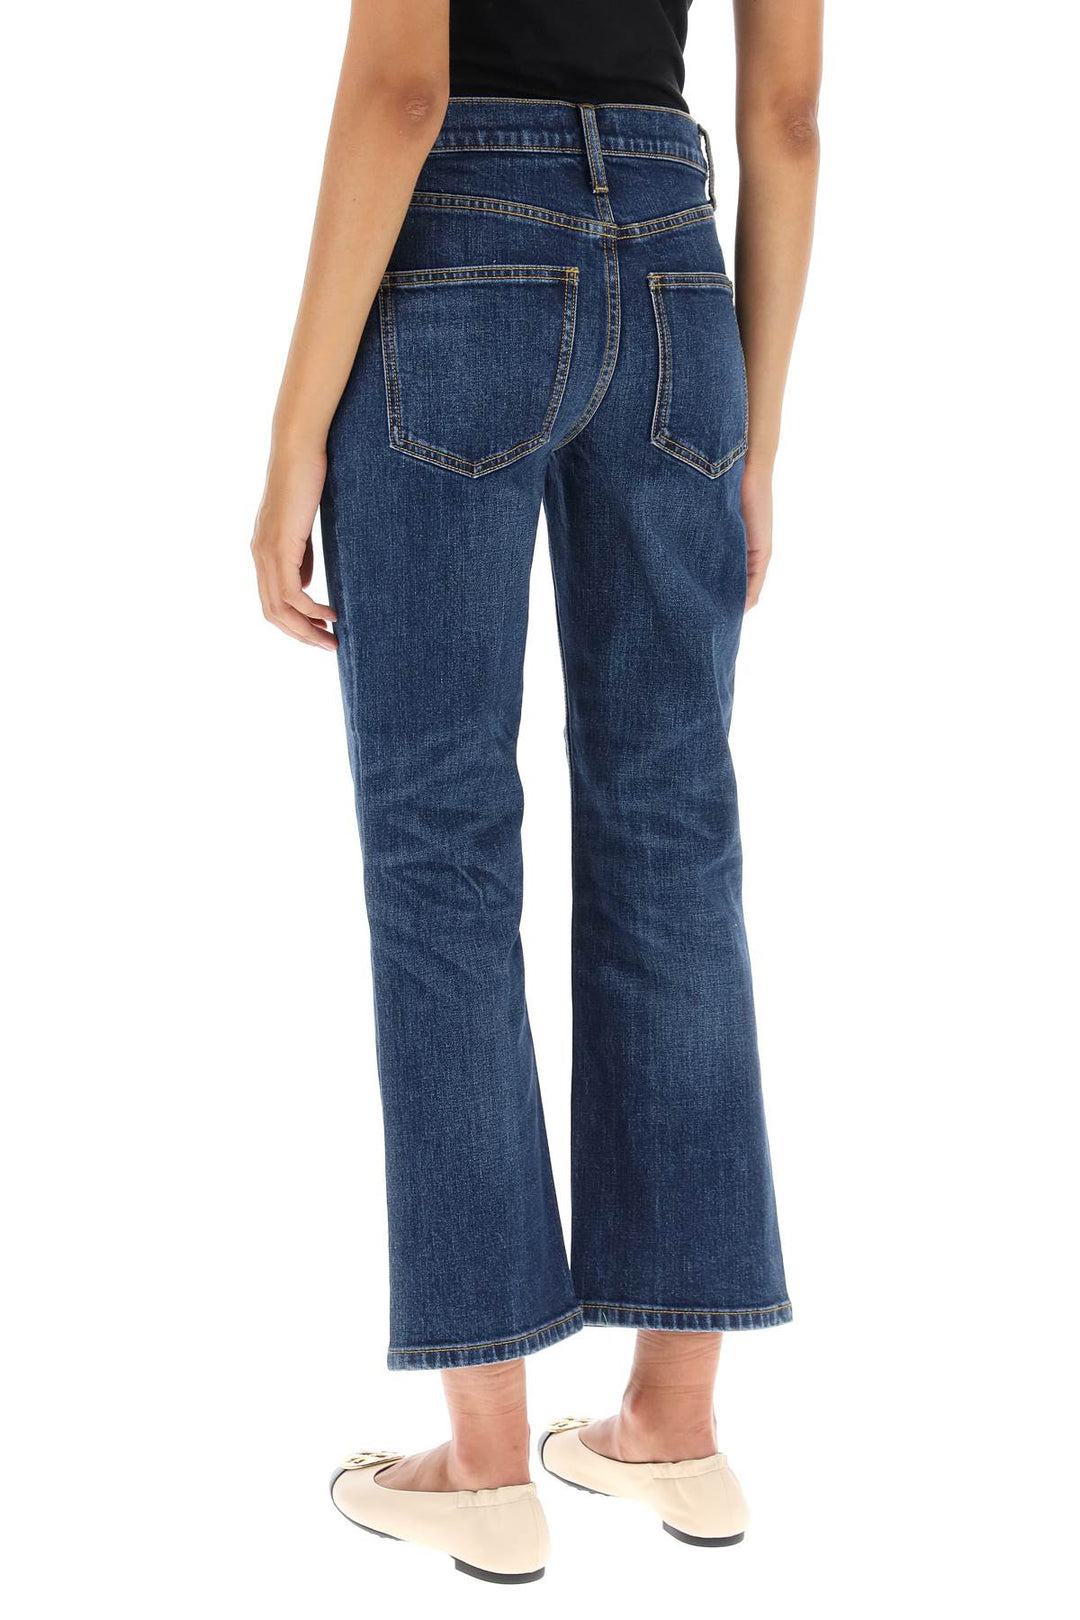 Jeans Cropped Svasati - Tory Burch - Donna